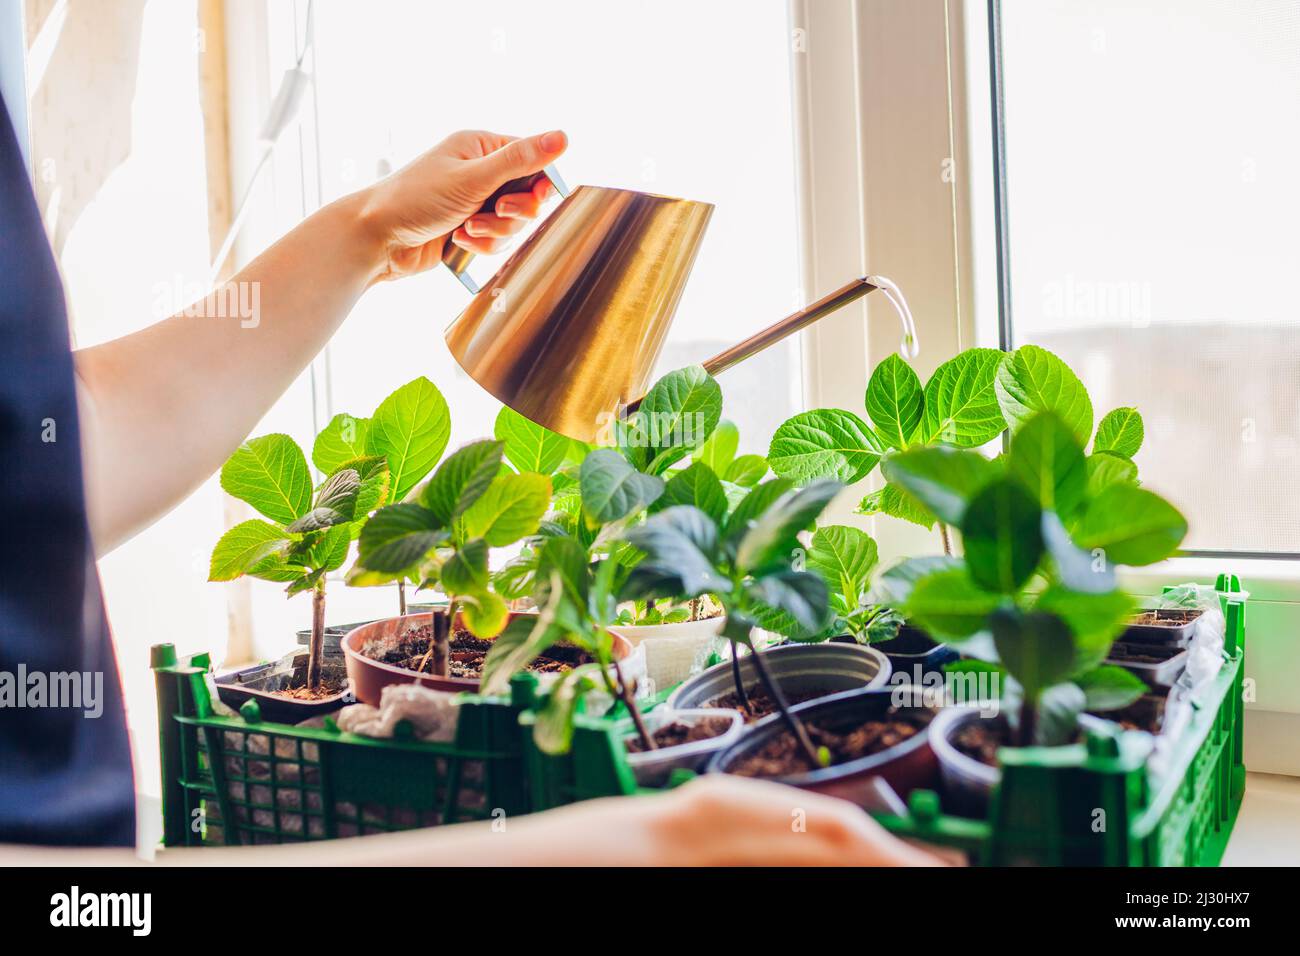 Watering hydrangea cuttings with watering can. Growing hydrangeas on window sill. Home gardening Stock Photo